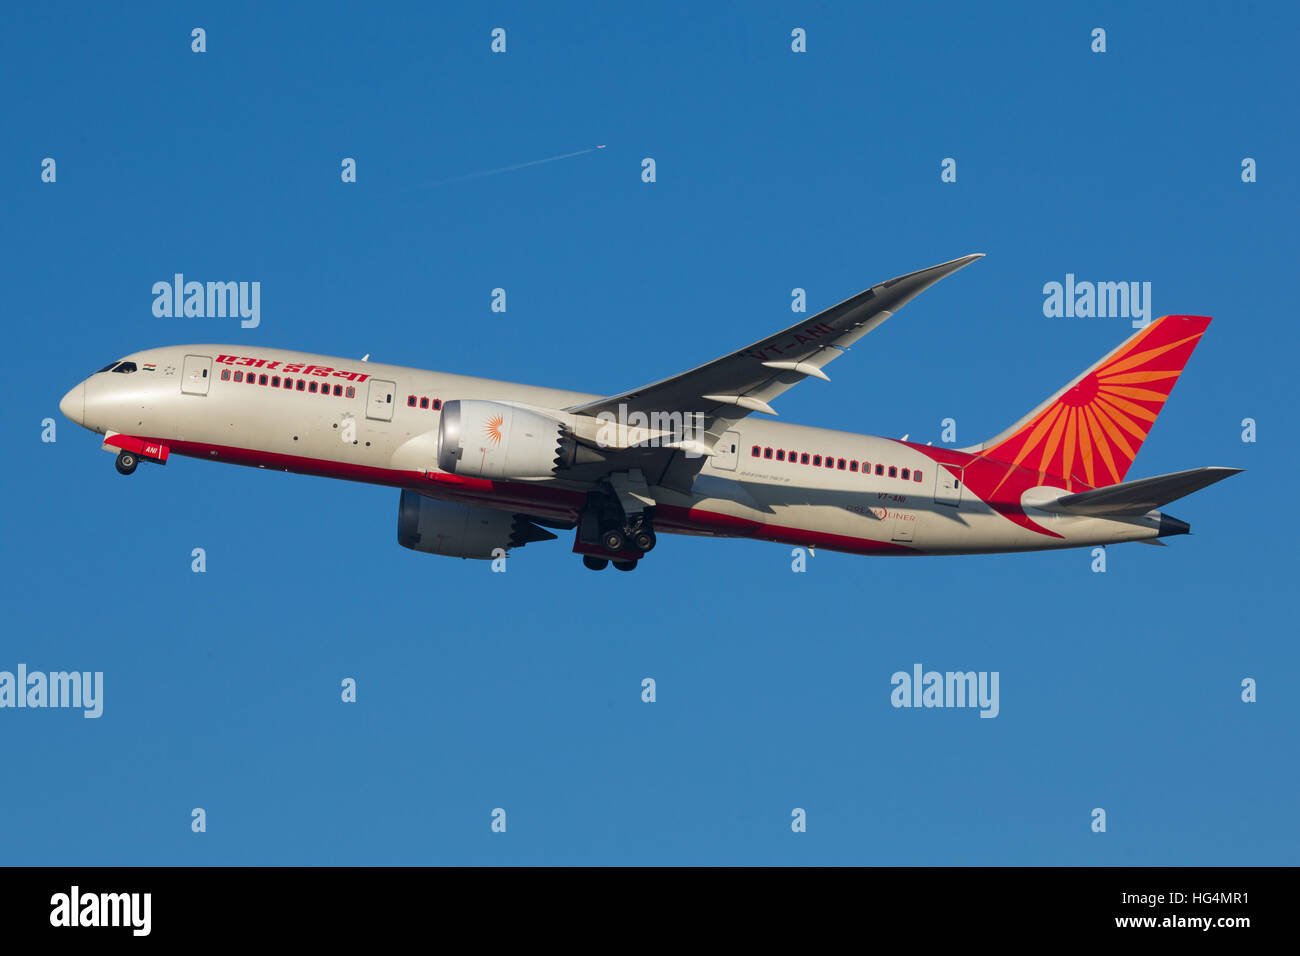 Air India Boeing 787 Dreamliner Aircraft Stock Photo